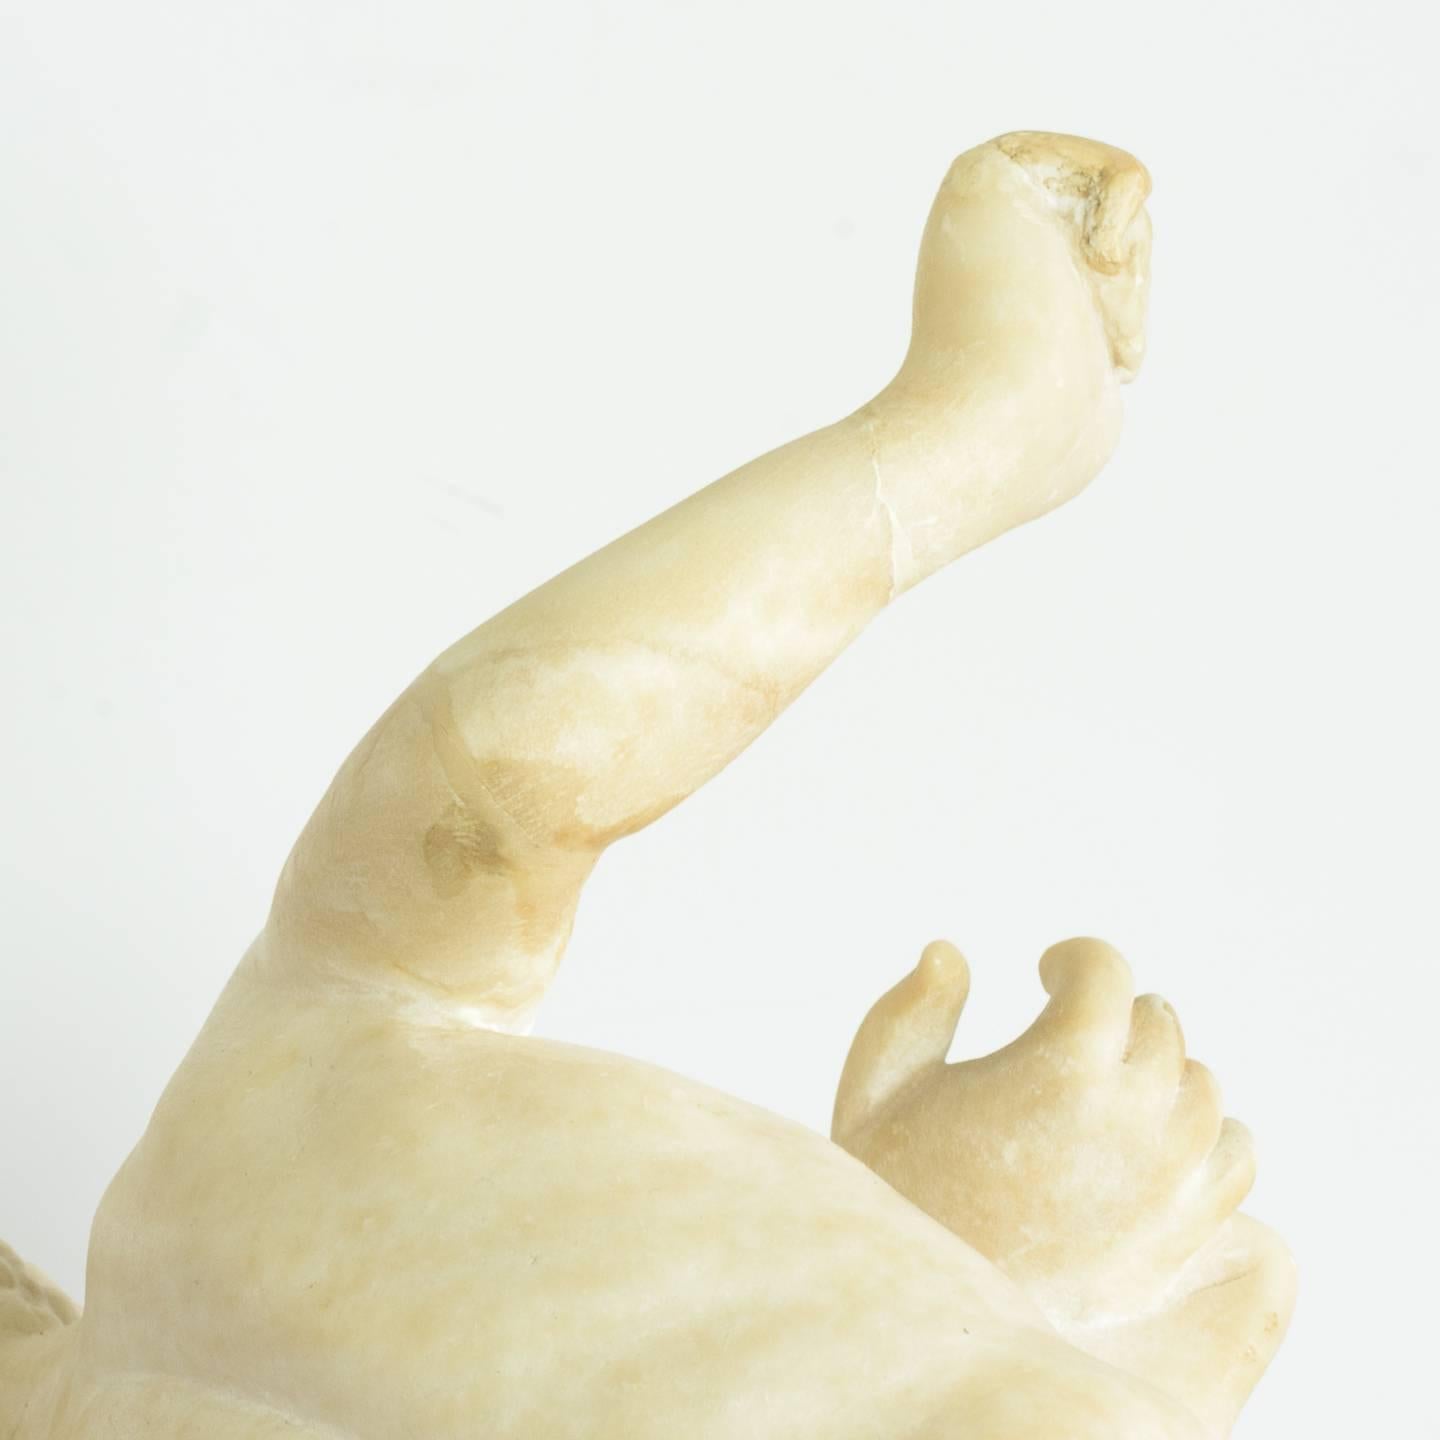 Carved Alabaster Sculpture of the Uffizi Wrestlers